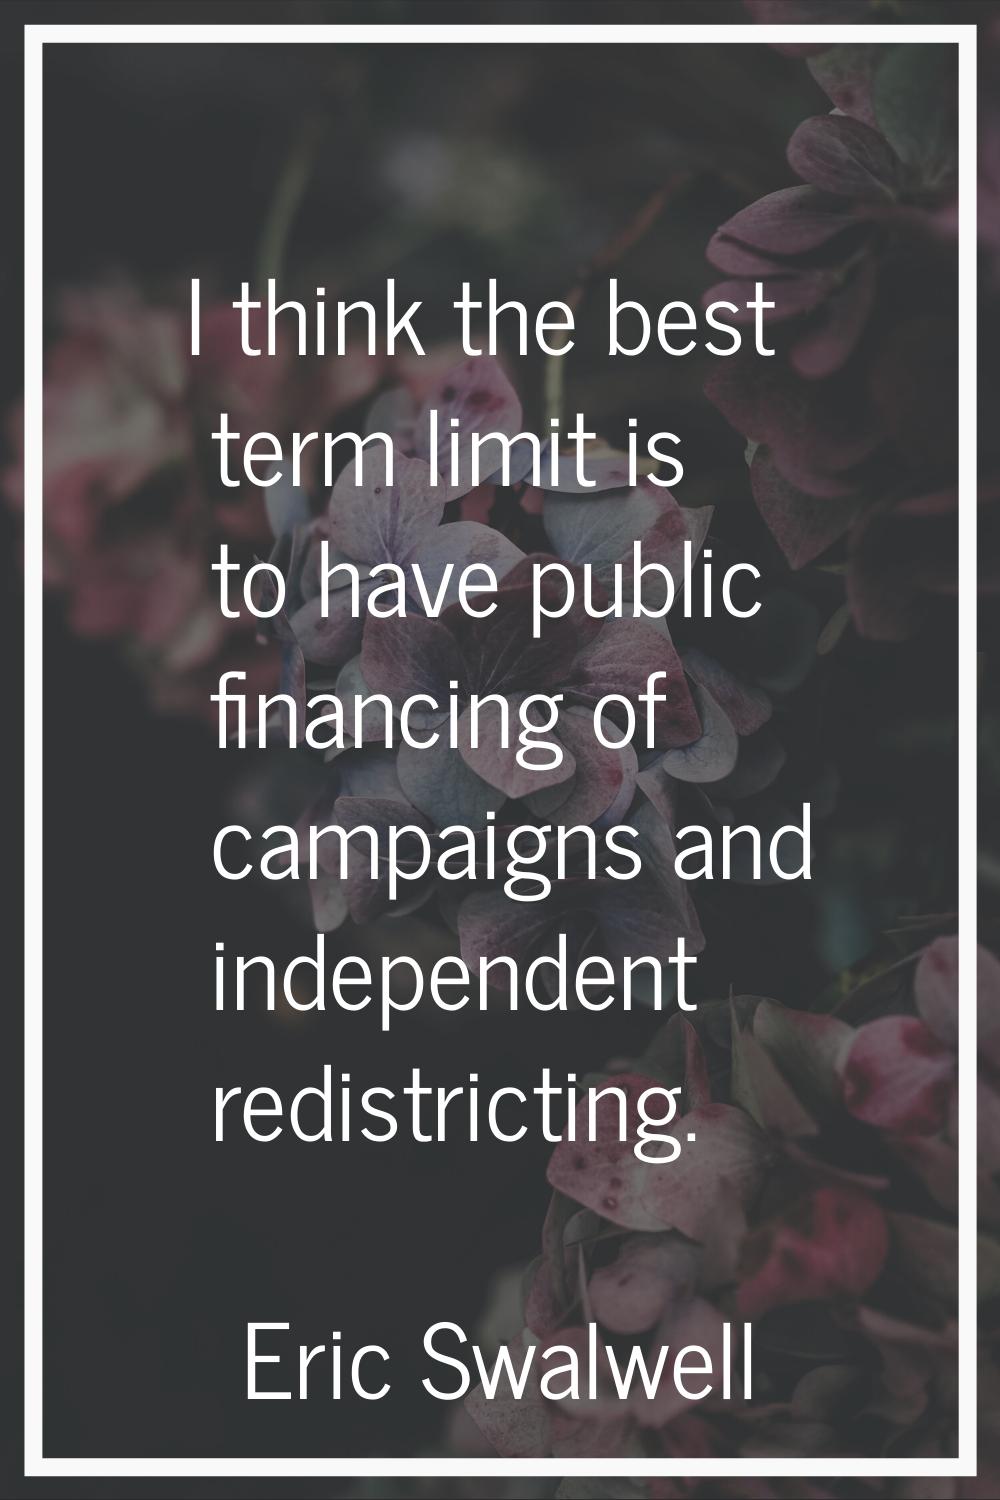 I think the best term limit is to have public financing of campaigns and independent redistricting.